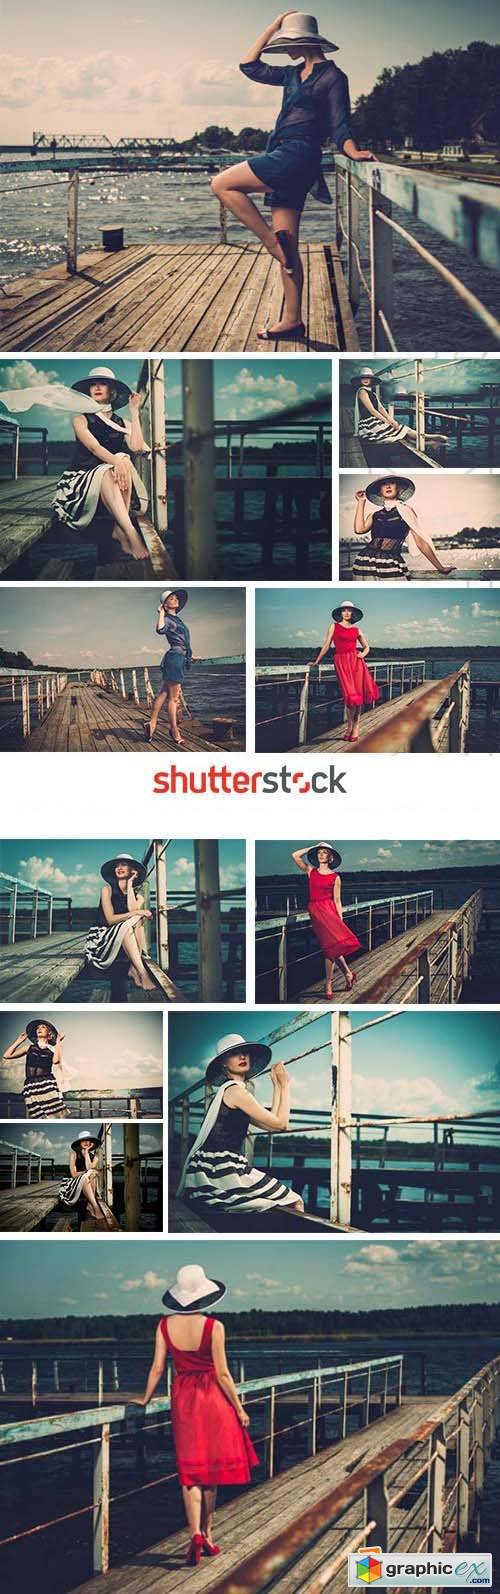 Fashionable Woman on Old Wooden Pier - 25xJPG